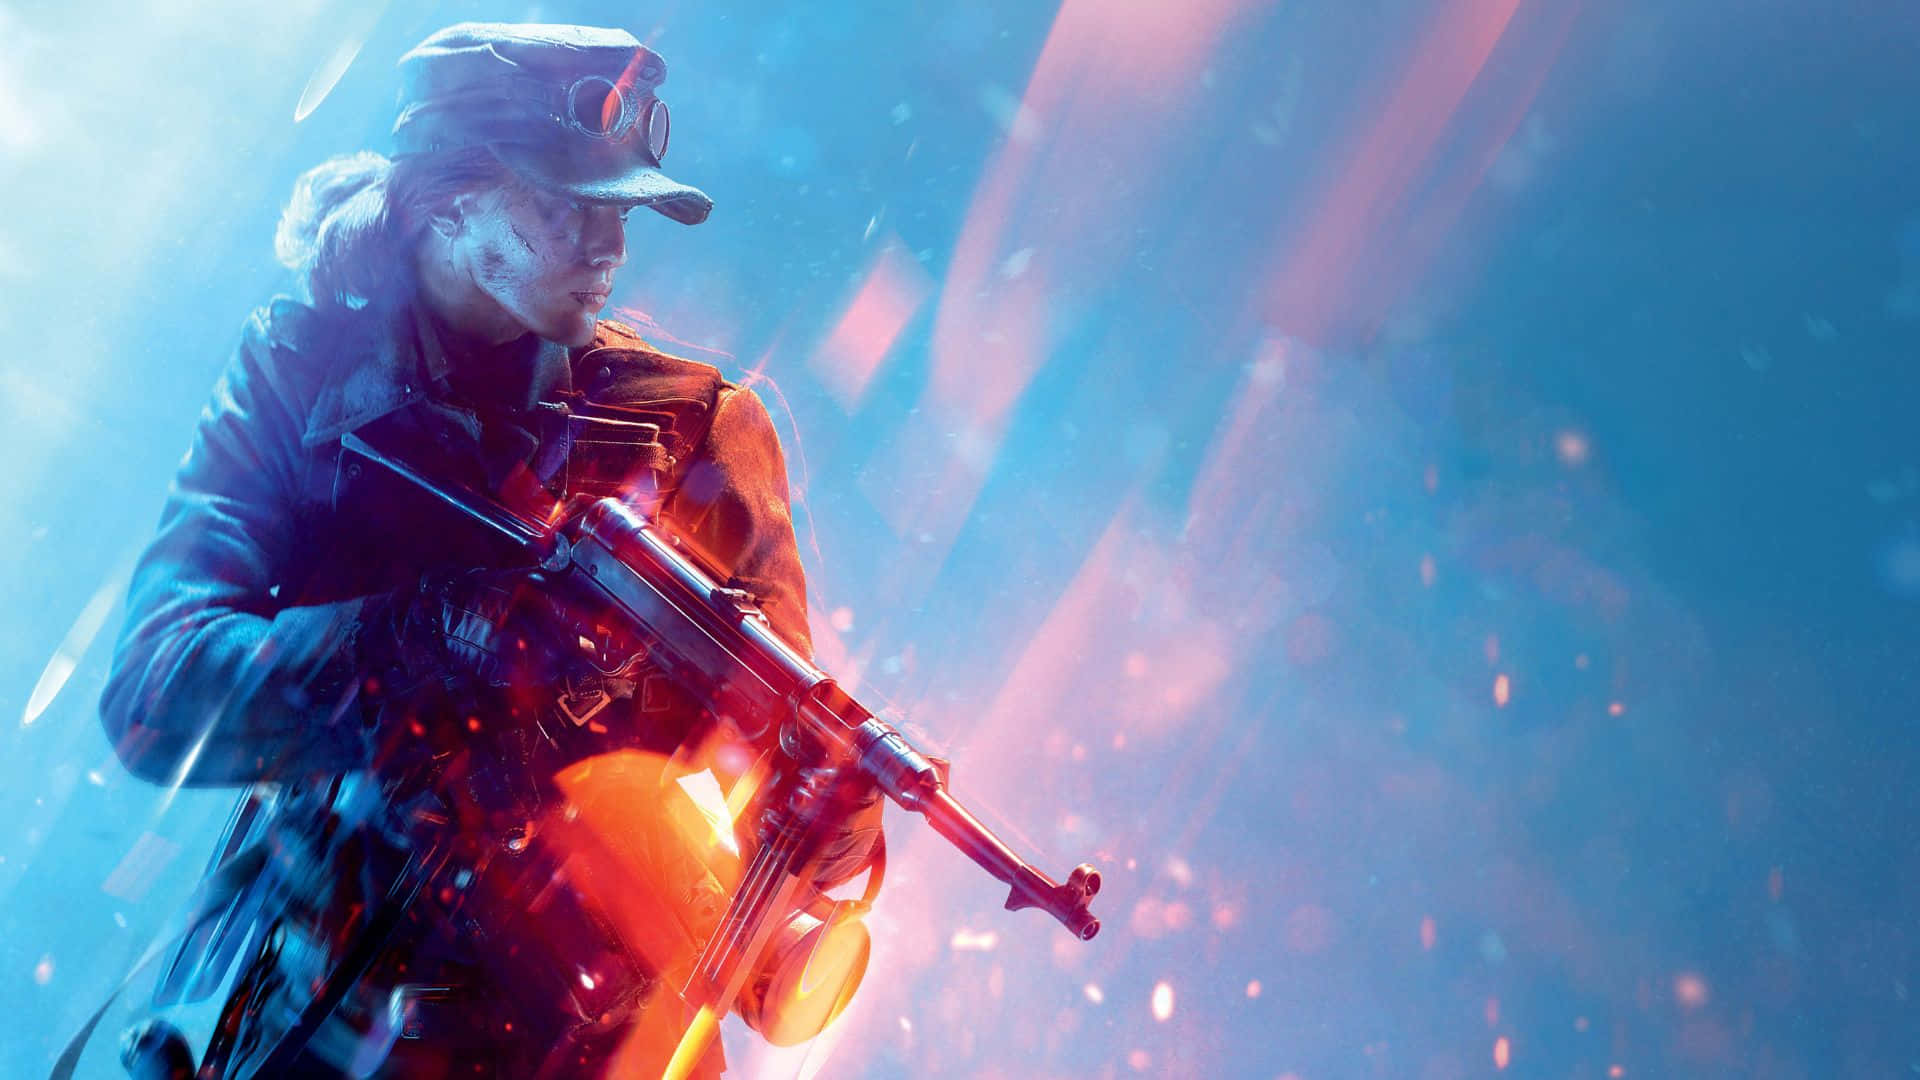 Experience Battle Thrills at its Finest - Battlefield V in 1080p